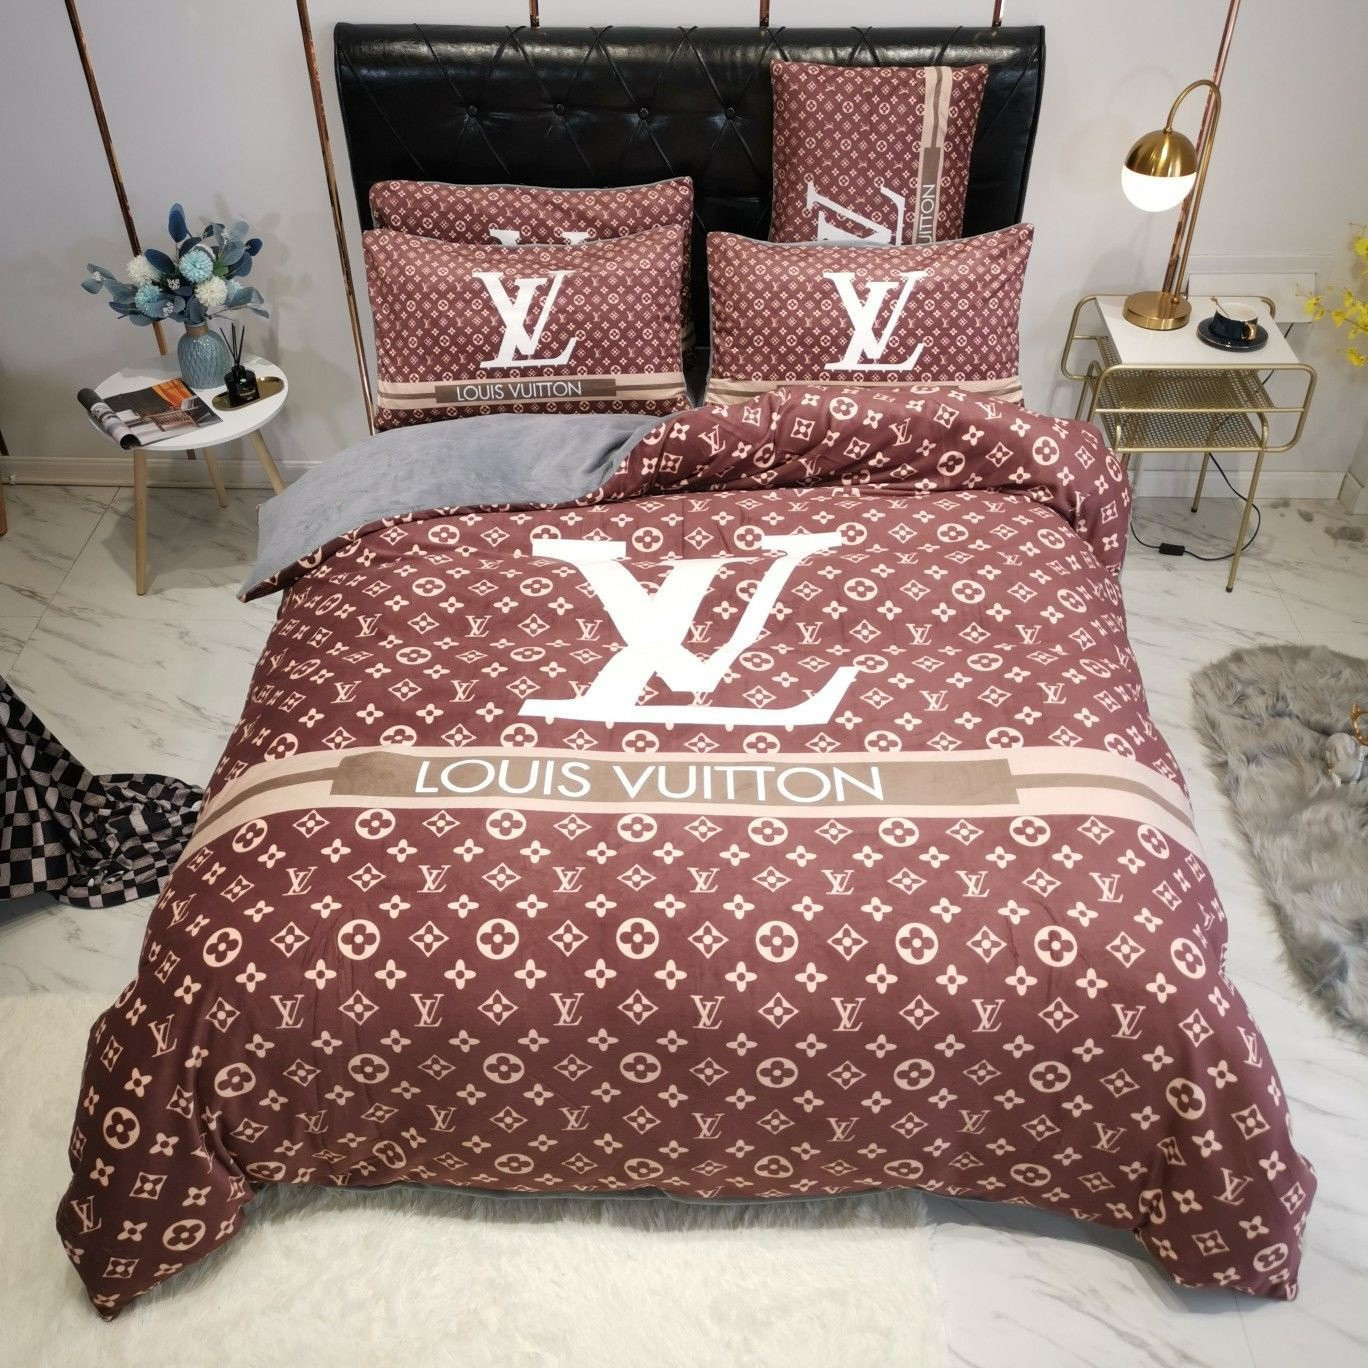 Luxury Brand High-end Bedding Set Arrival 06.04.2022 &#8211 5